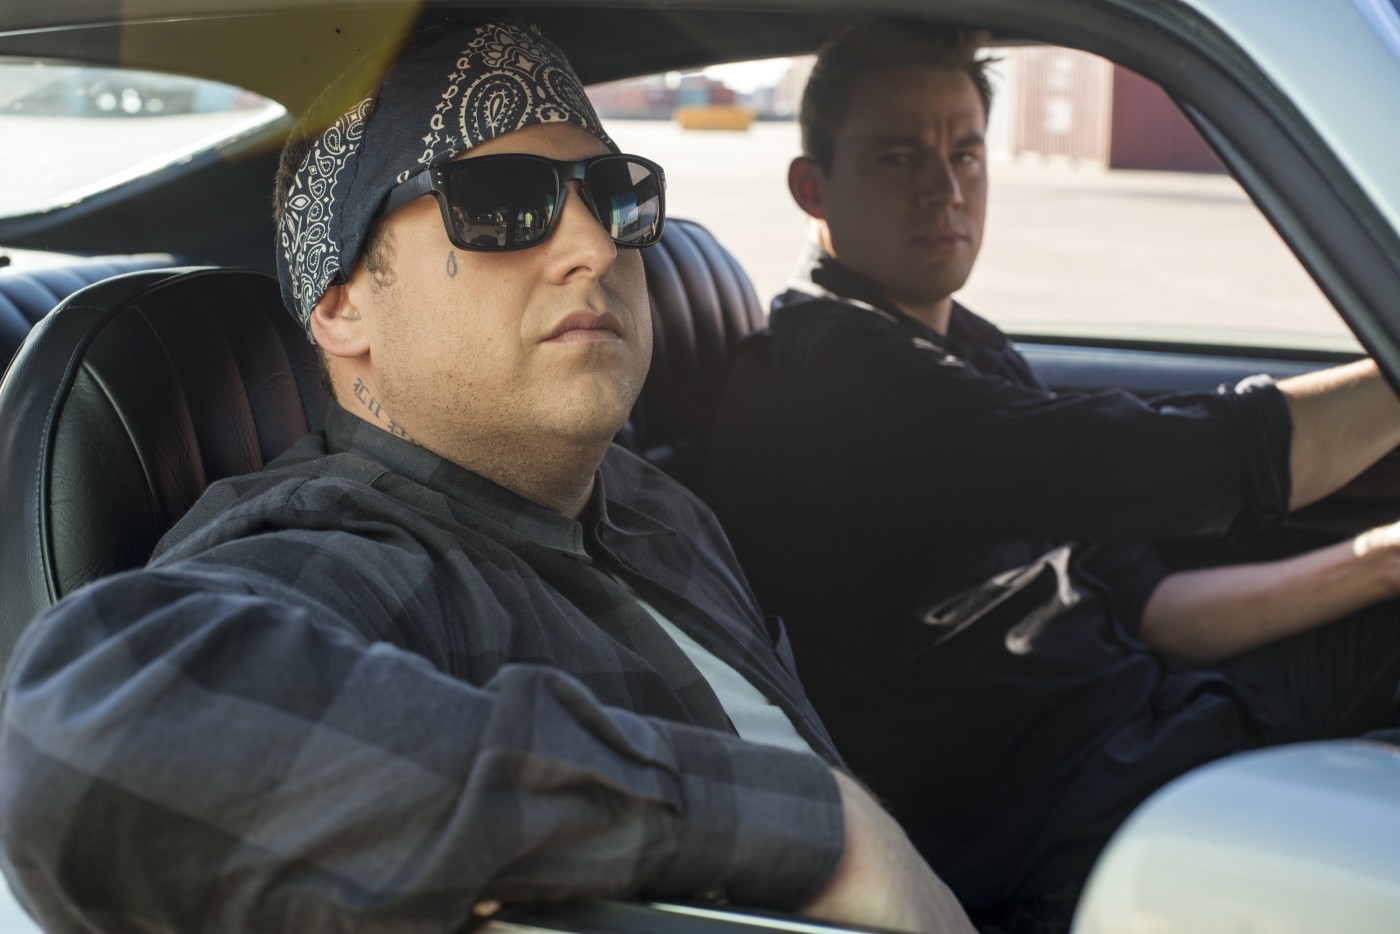 Jonah Hill stars as Schmidt and Channing Tatum stars as Jenko in Columbia Pictures' 22 Jump Street (2014)